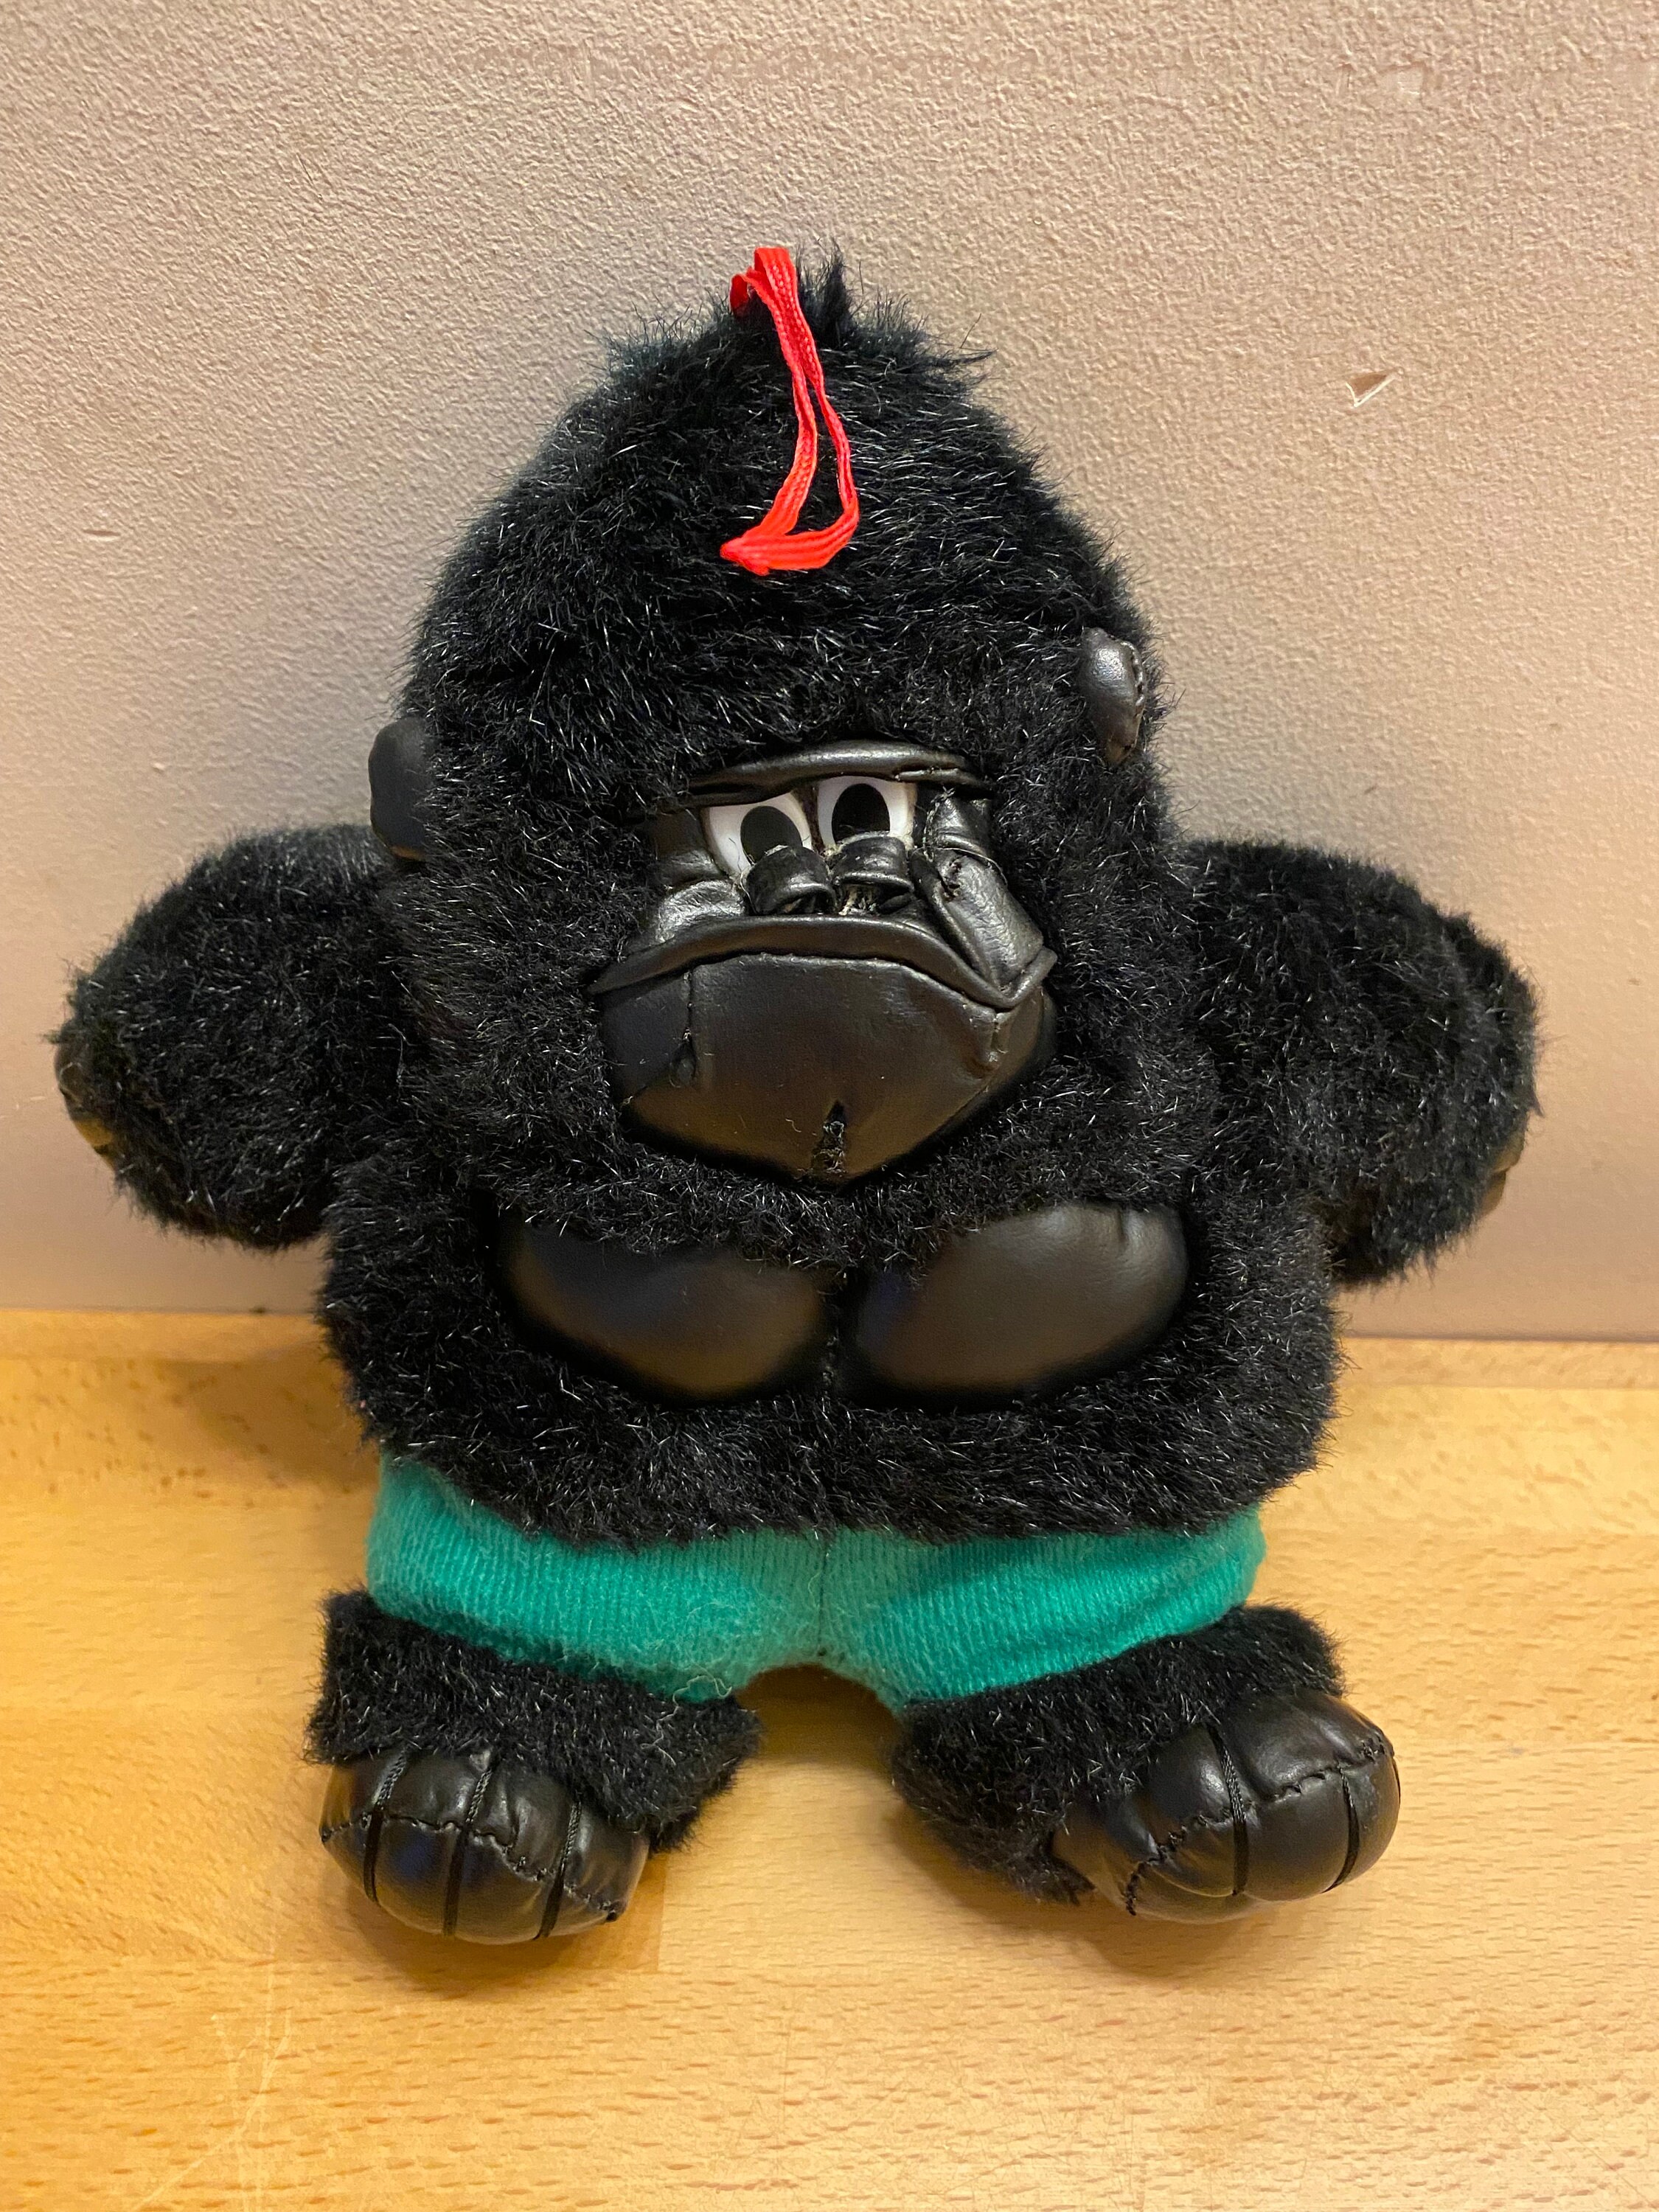 My nan made my gorilla tag character as a plush with crochet